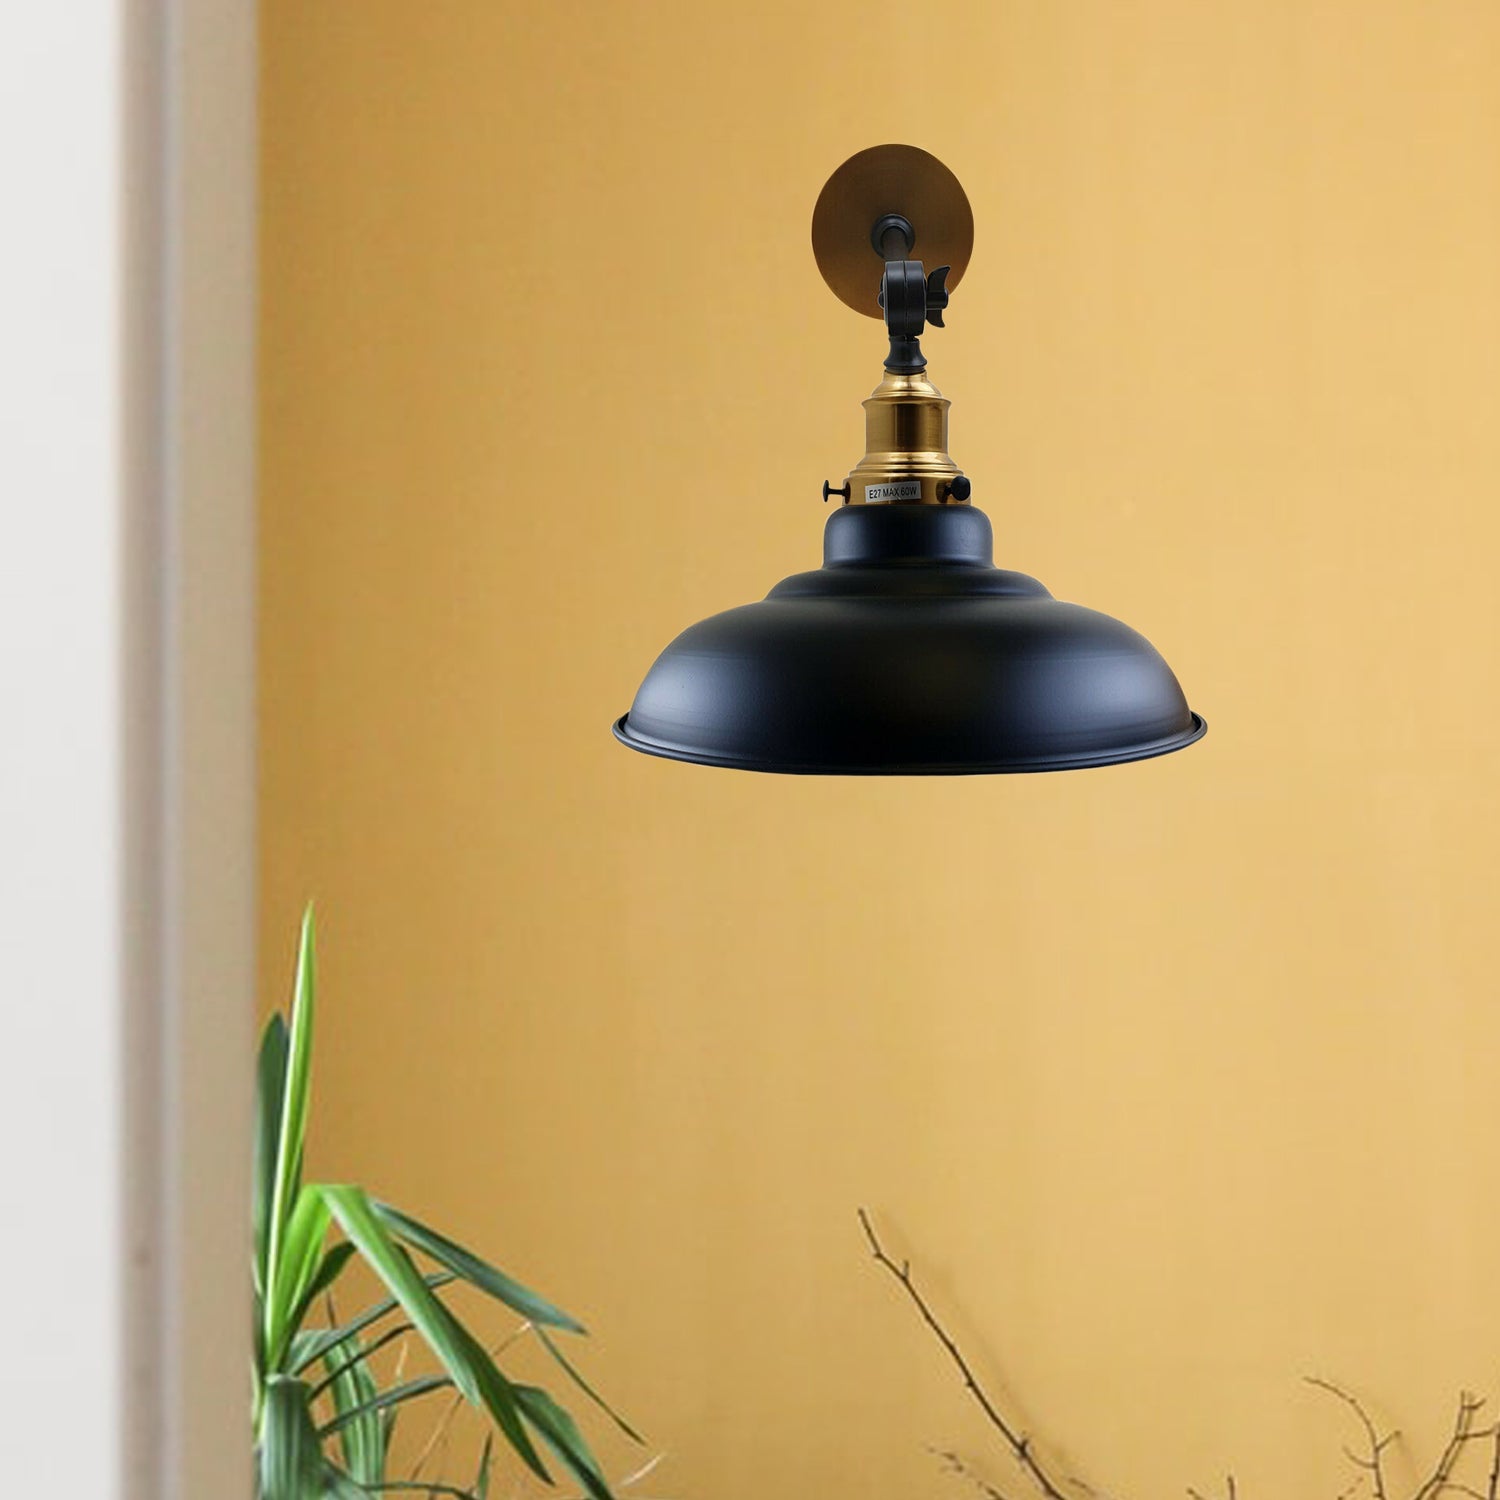 Black Shade With Adjustable Curvy Swing Arm Wall Light Fixture Loft Style Industrial Wall Sconce~3462 - LEDSone UK Ltd